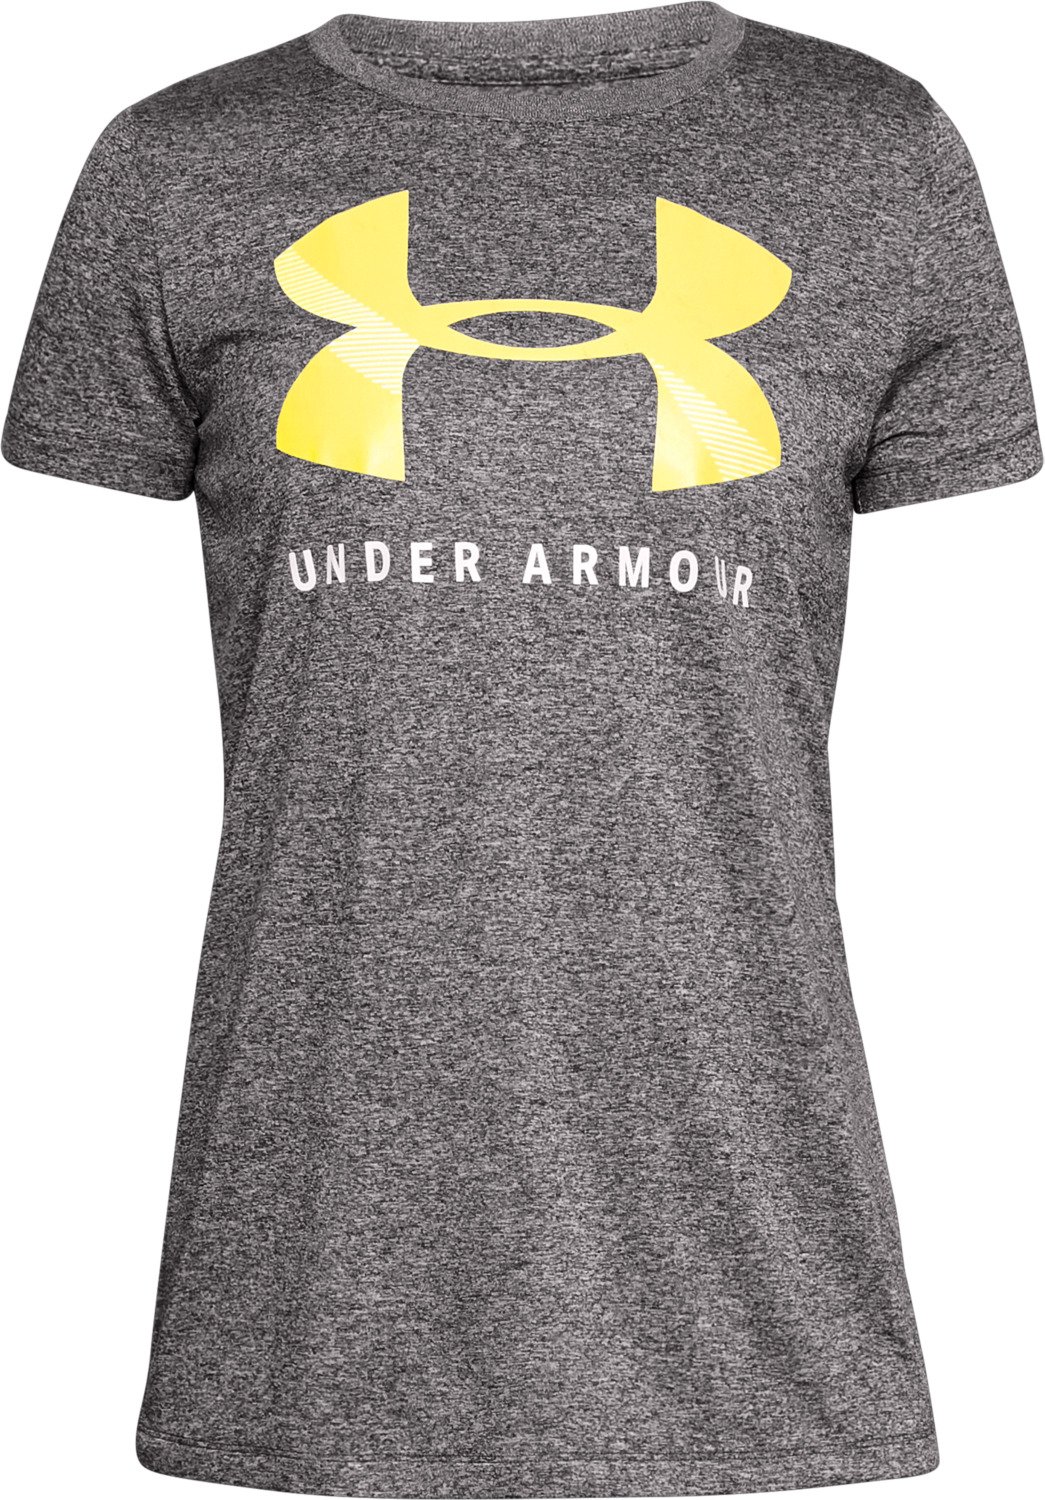 Women's Clothes | Women's Athletic Clothes & Outdoor Clothes | Academy